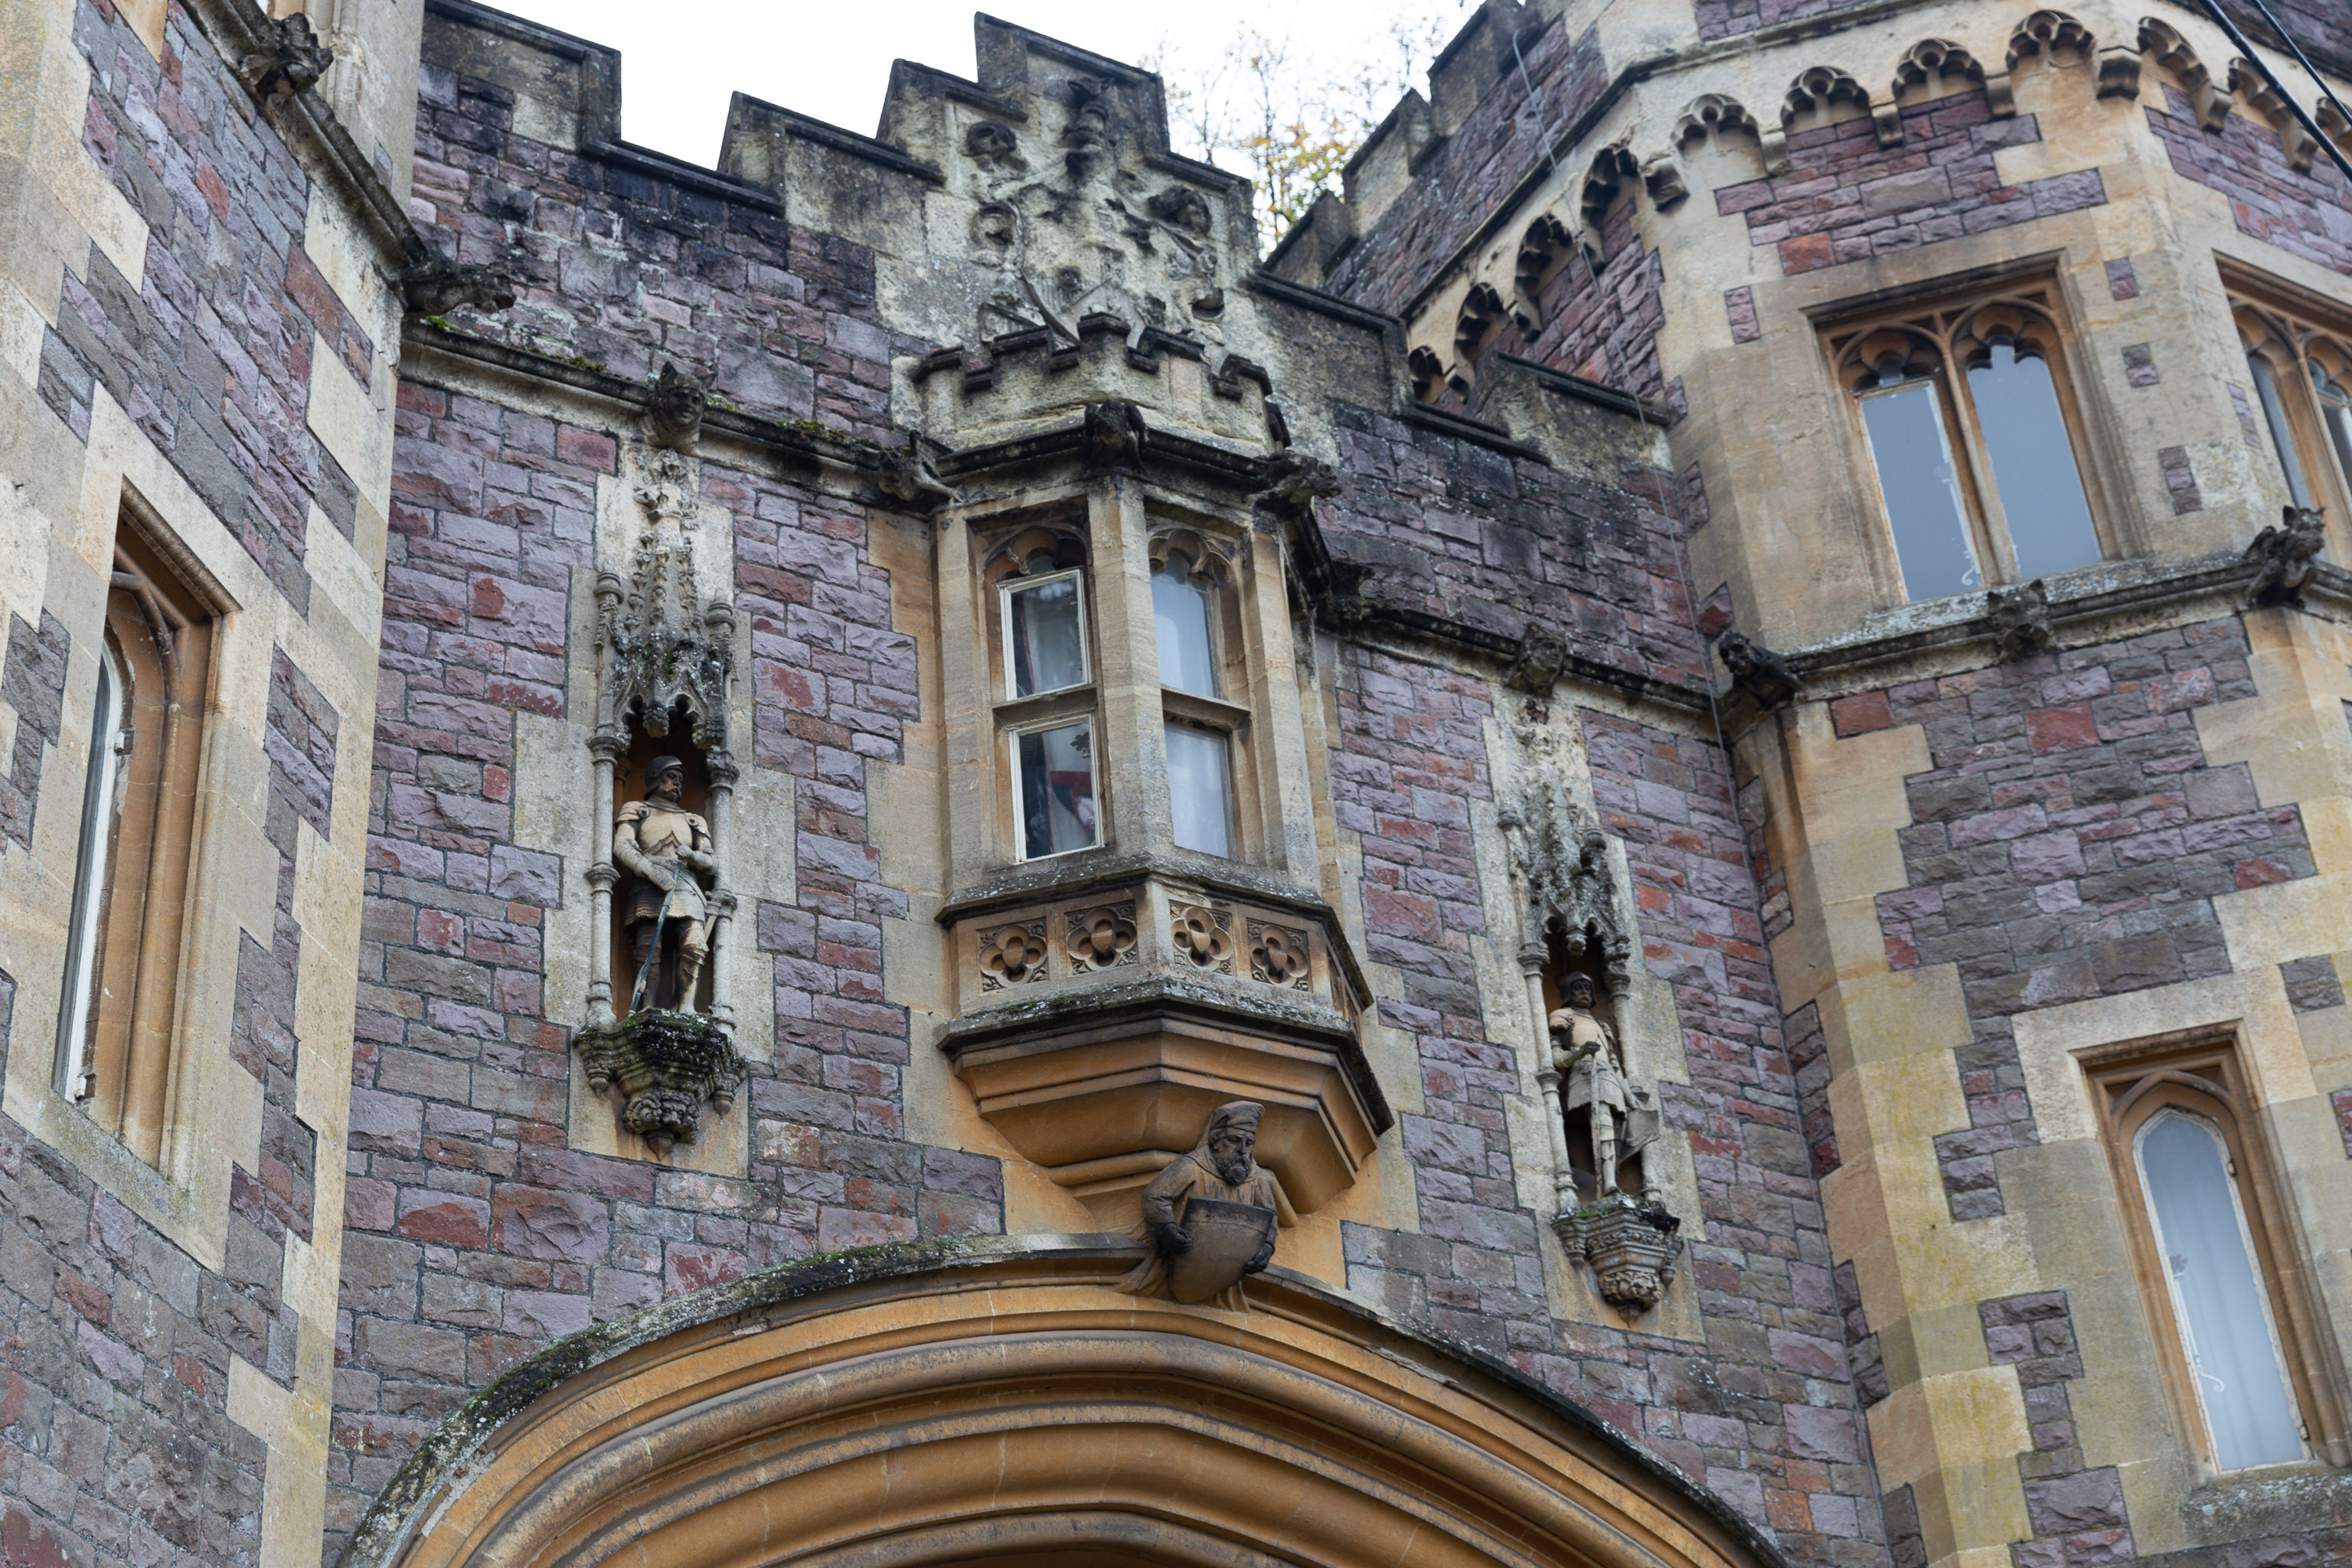 Knights
"above is a 3-light oriel with cusped tracery and flanking niches with statues of knights"
